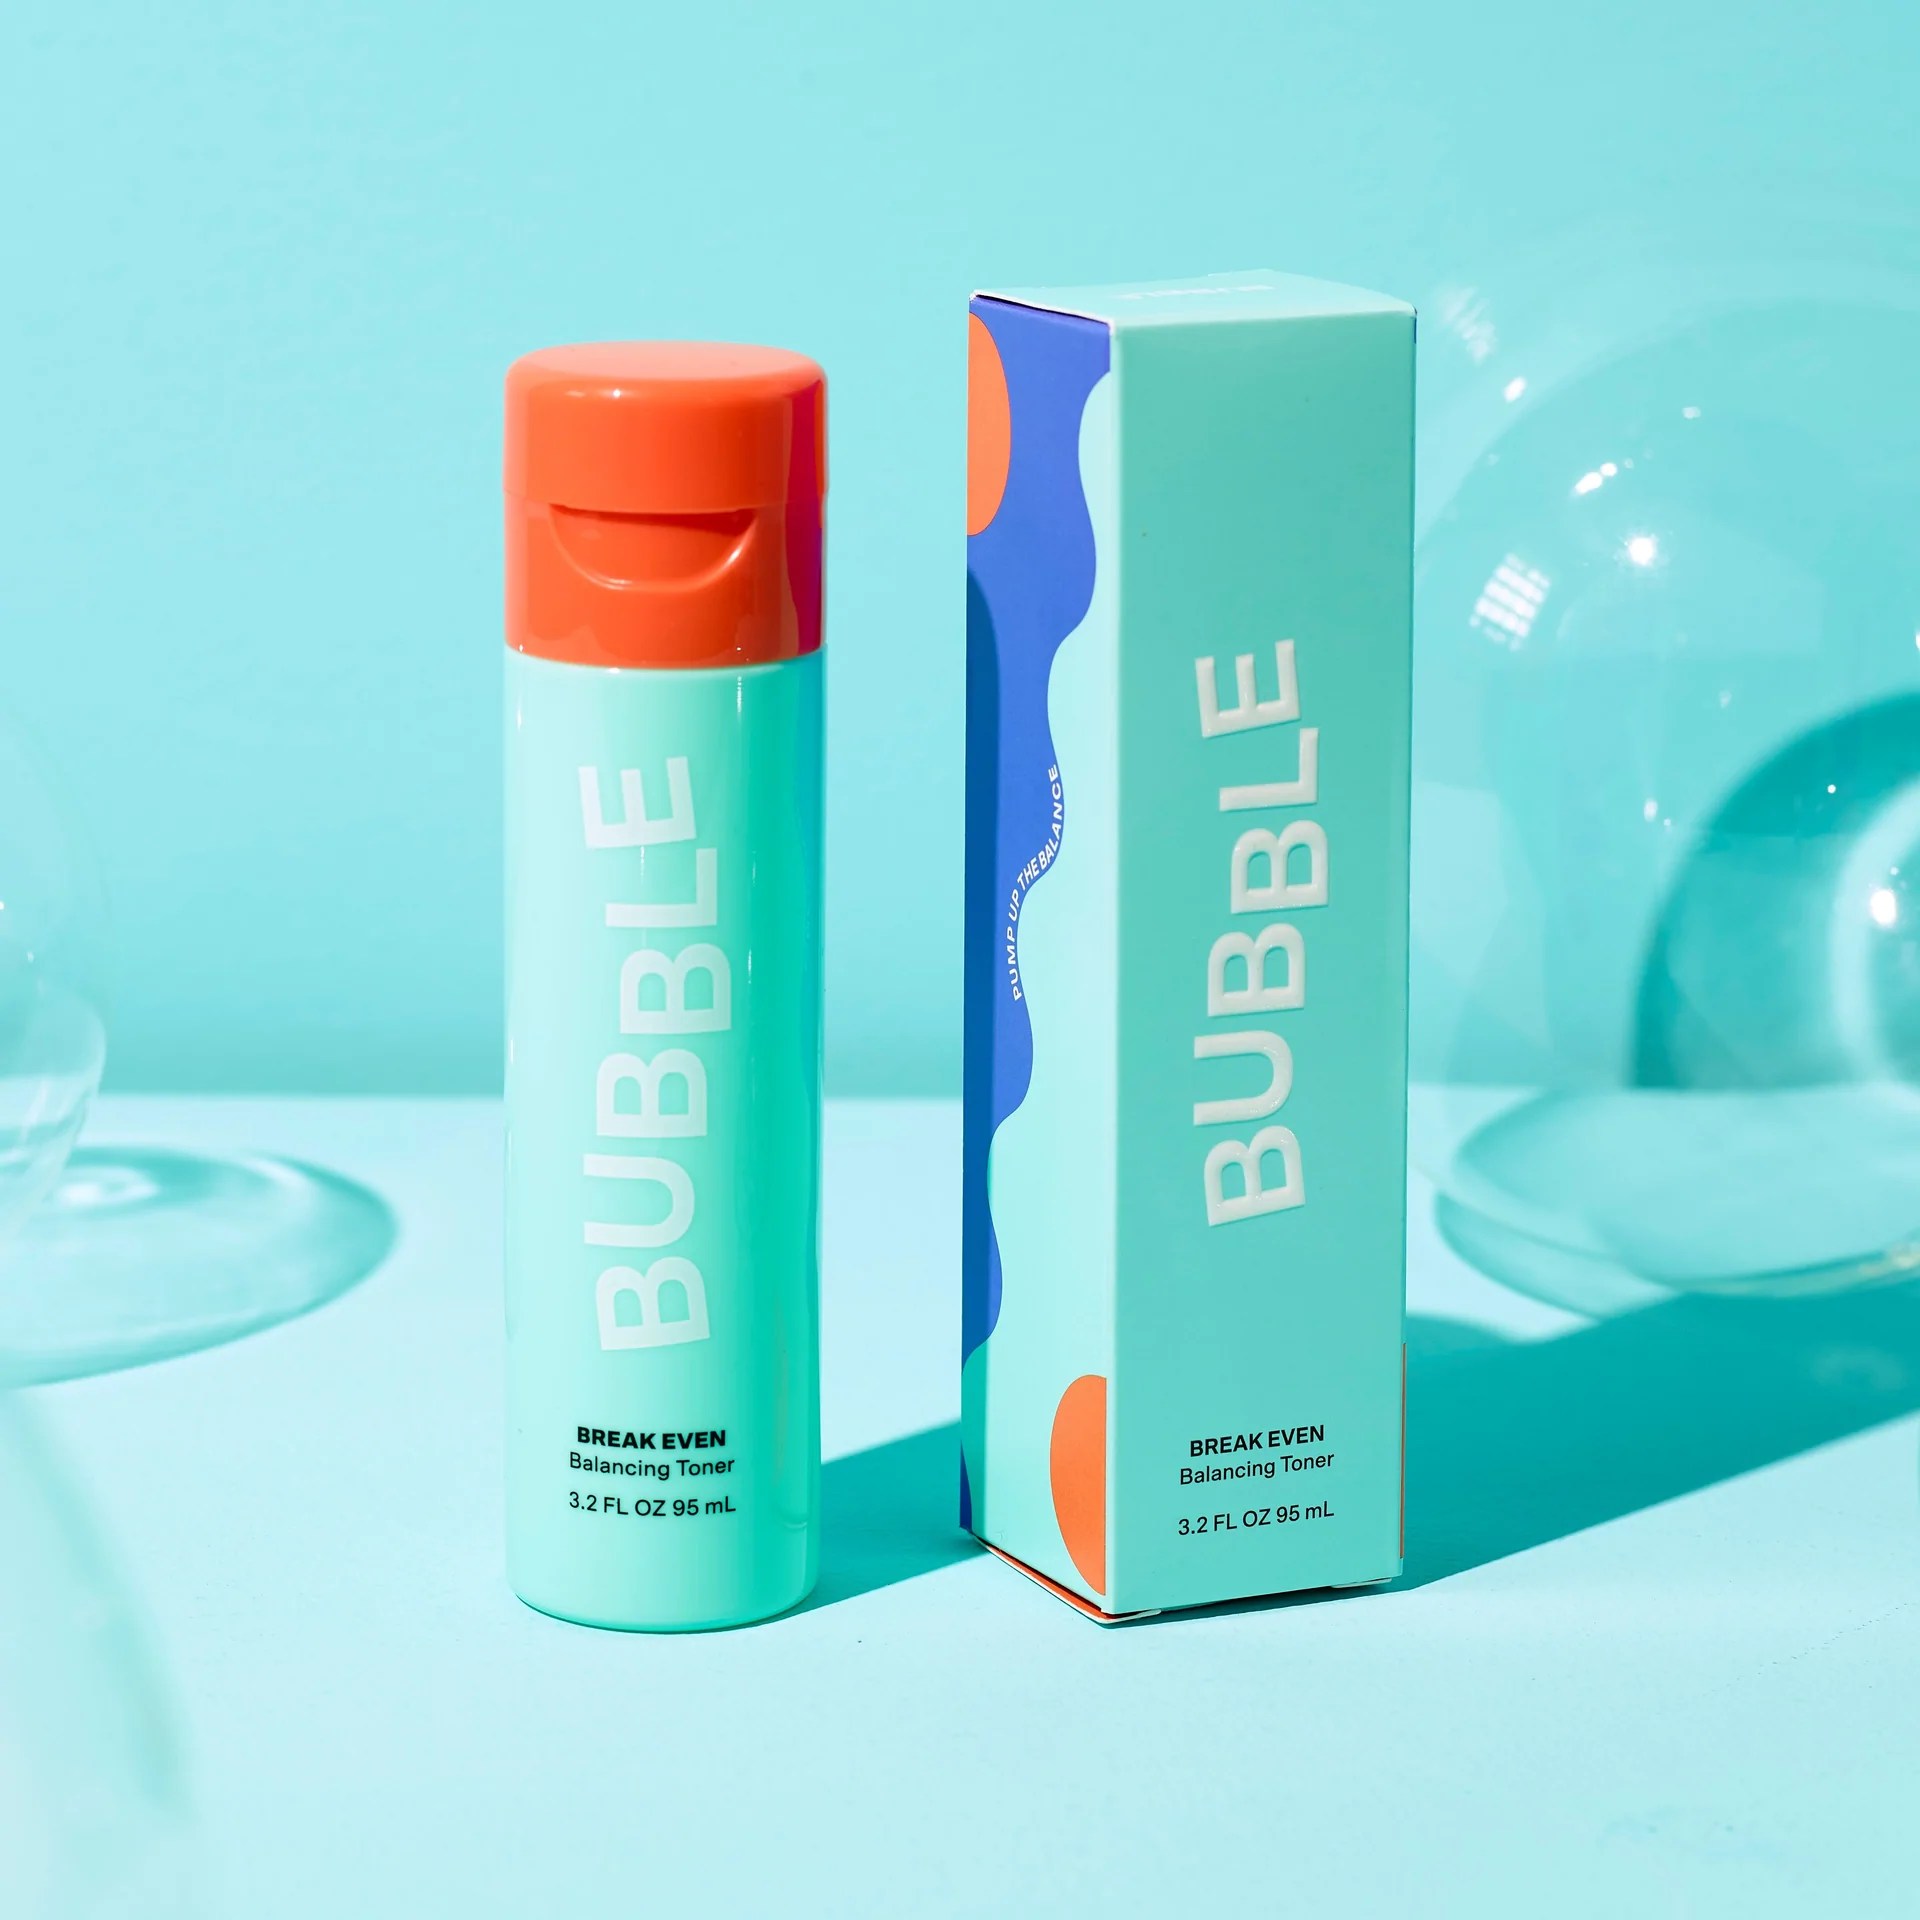 Aaaand the award for best gifter… - Bubble Skin Care